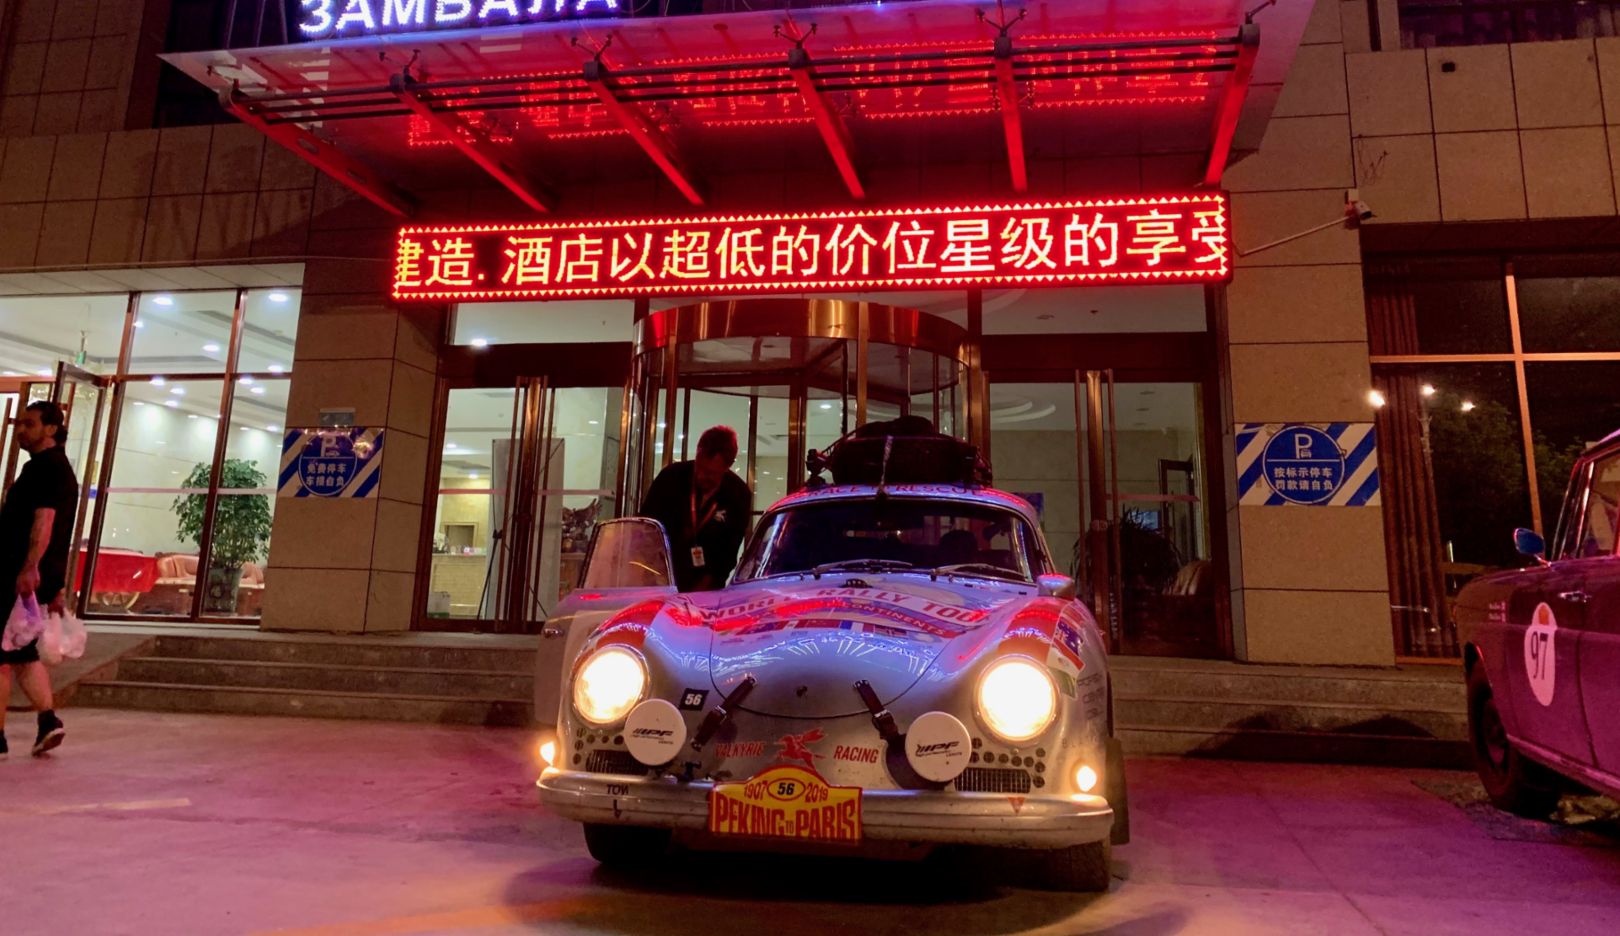 Renée Brinkerhoff passed through 12 countries and two continents in the Porsche 356 during the rally. After starting in Beijing, the participants reached Mongolia two days later.